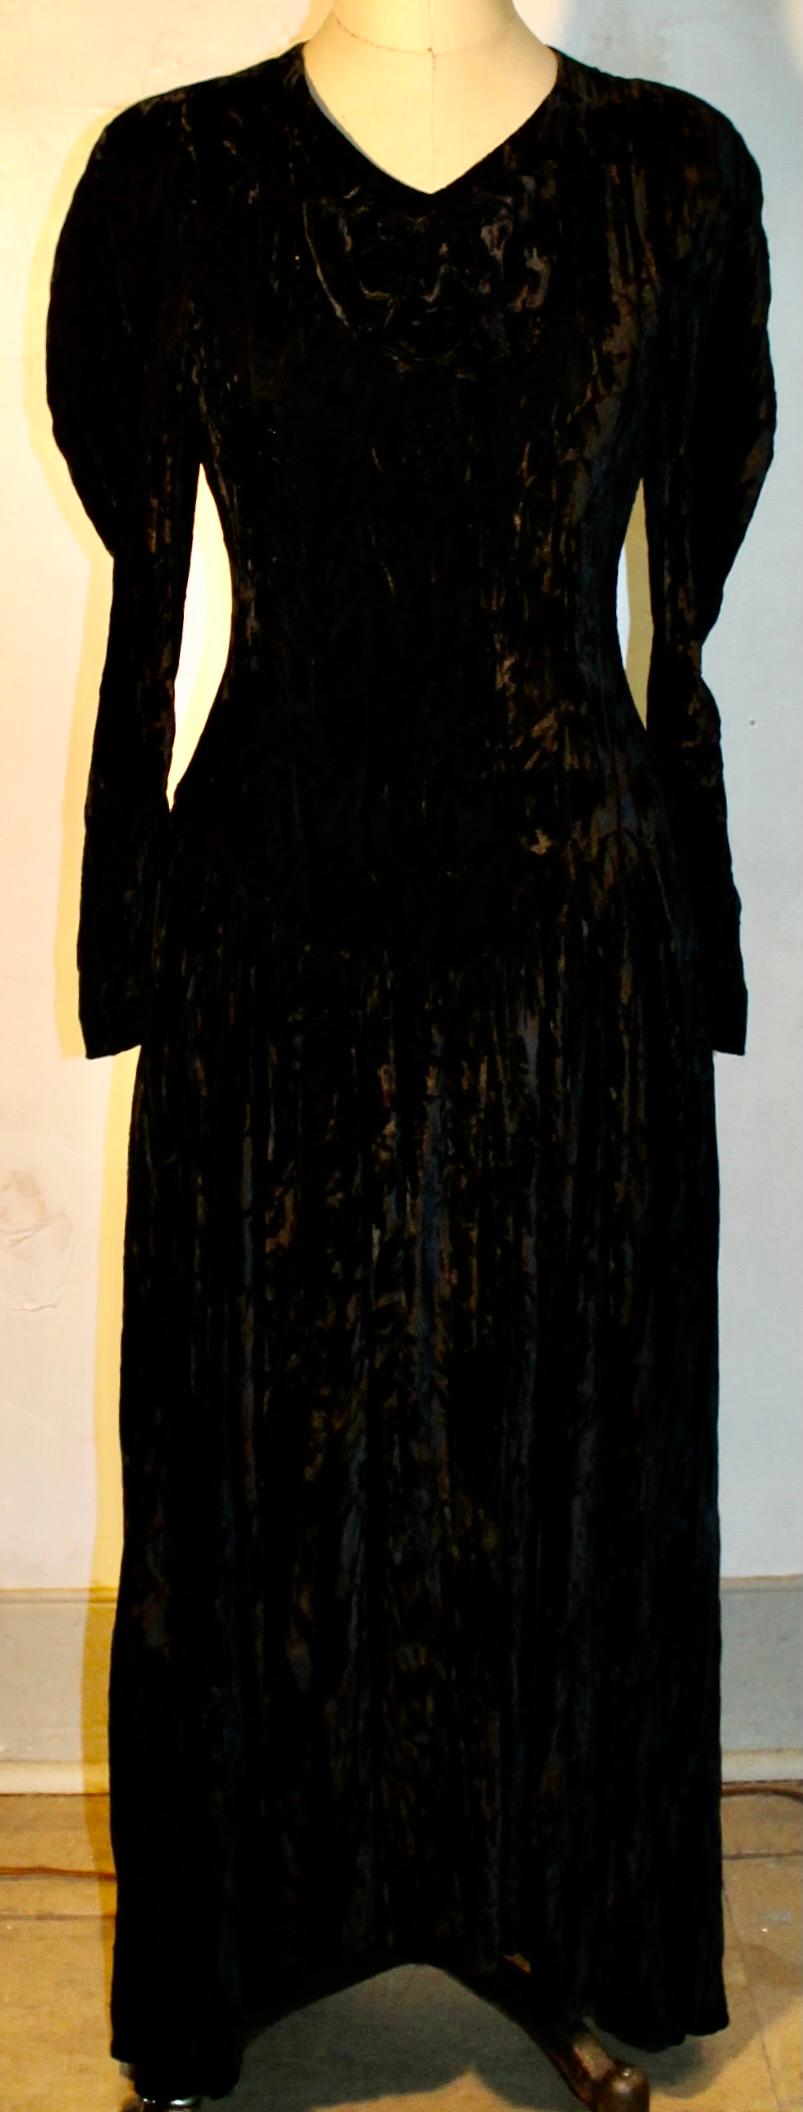 Sonia Rykiel Paris, Crushed Velvet Dress In Good Condition For Sale In Sharon, CT